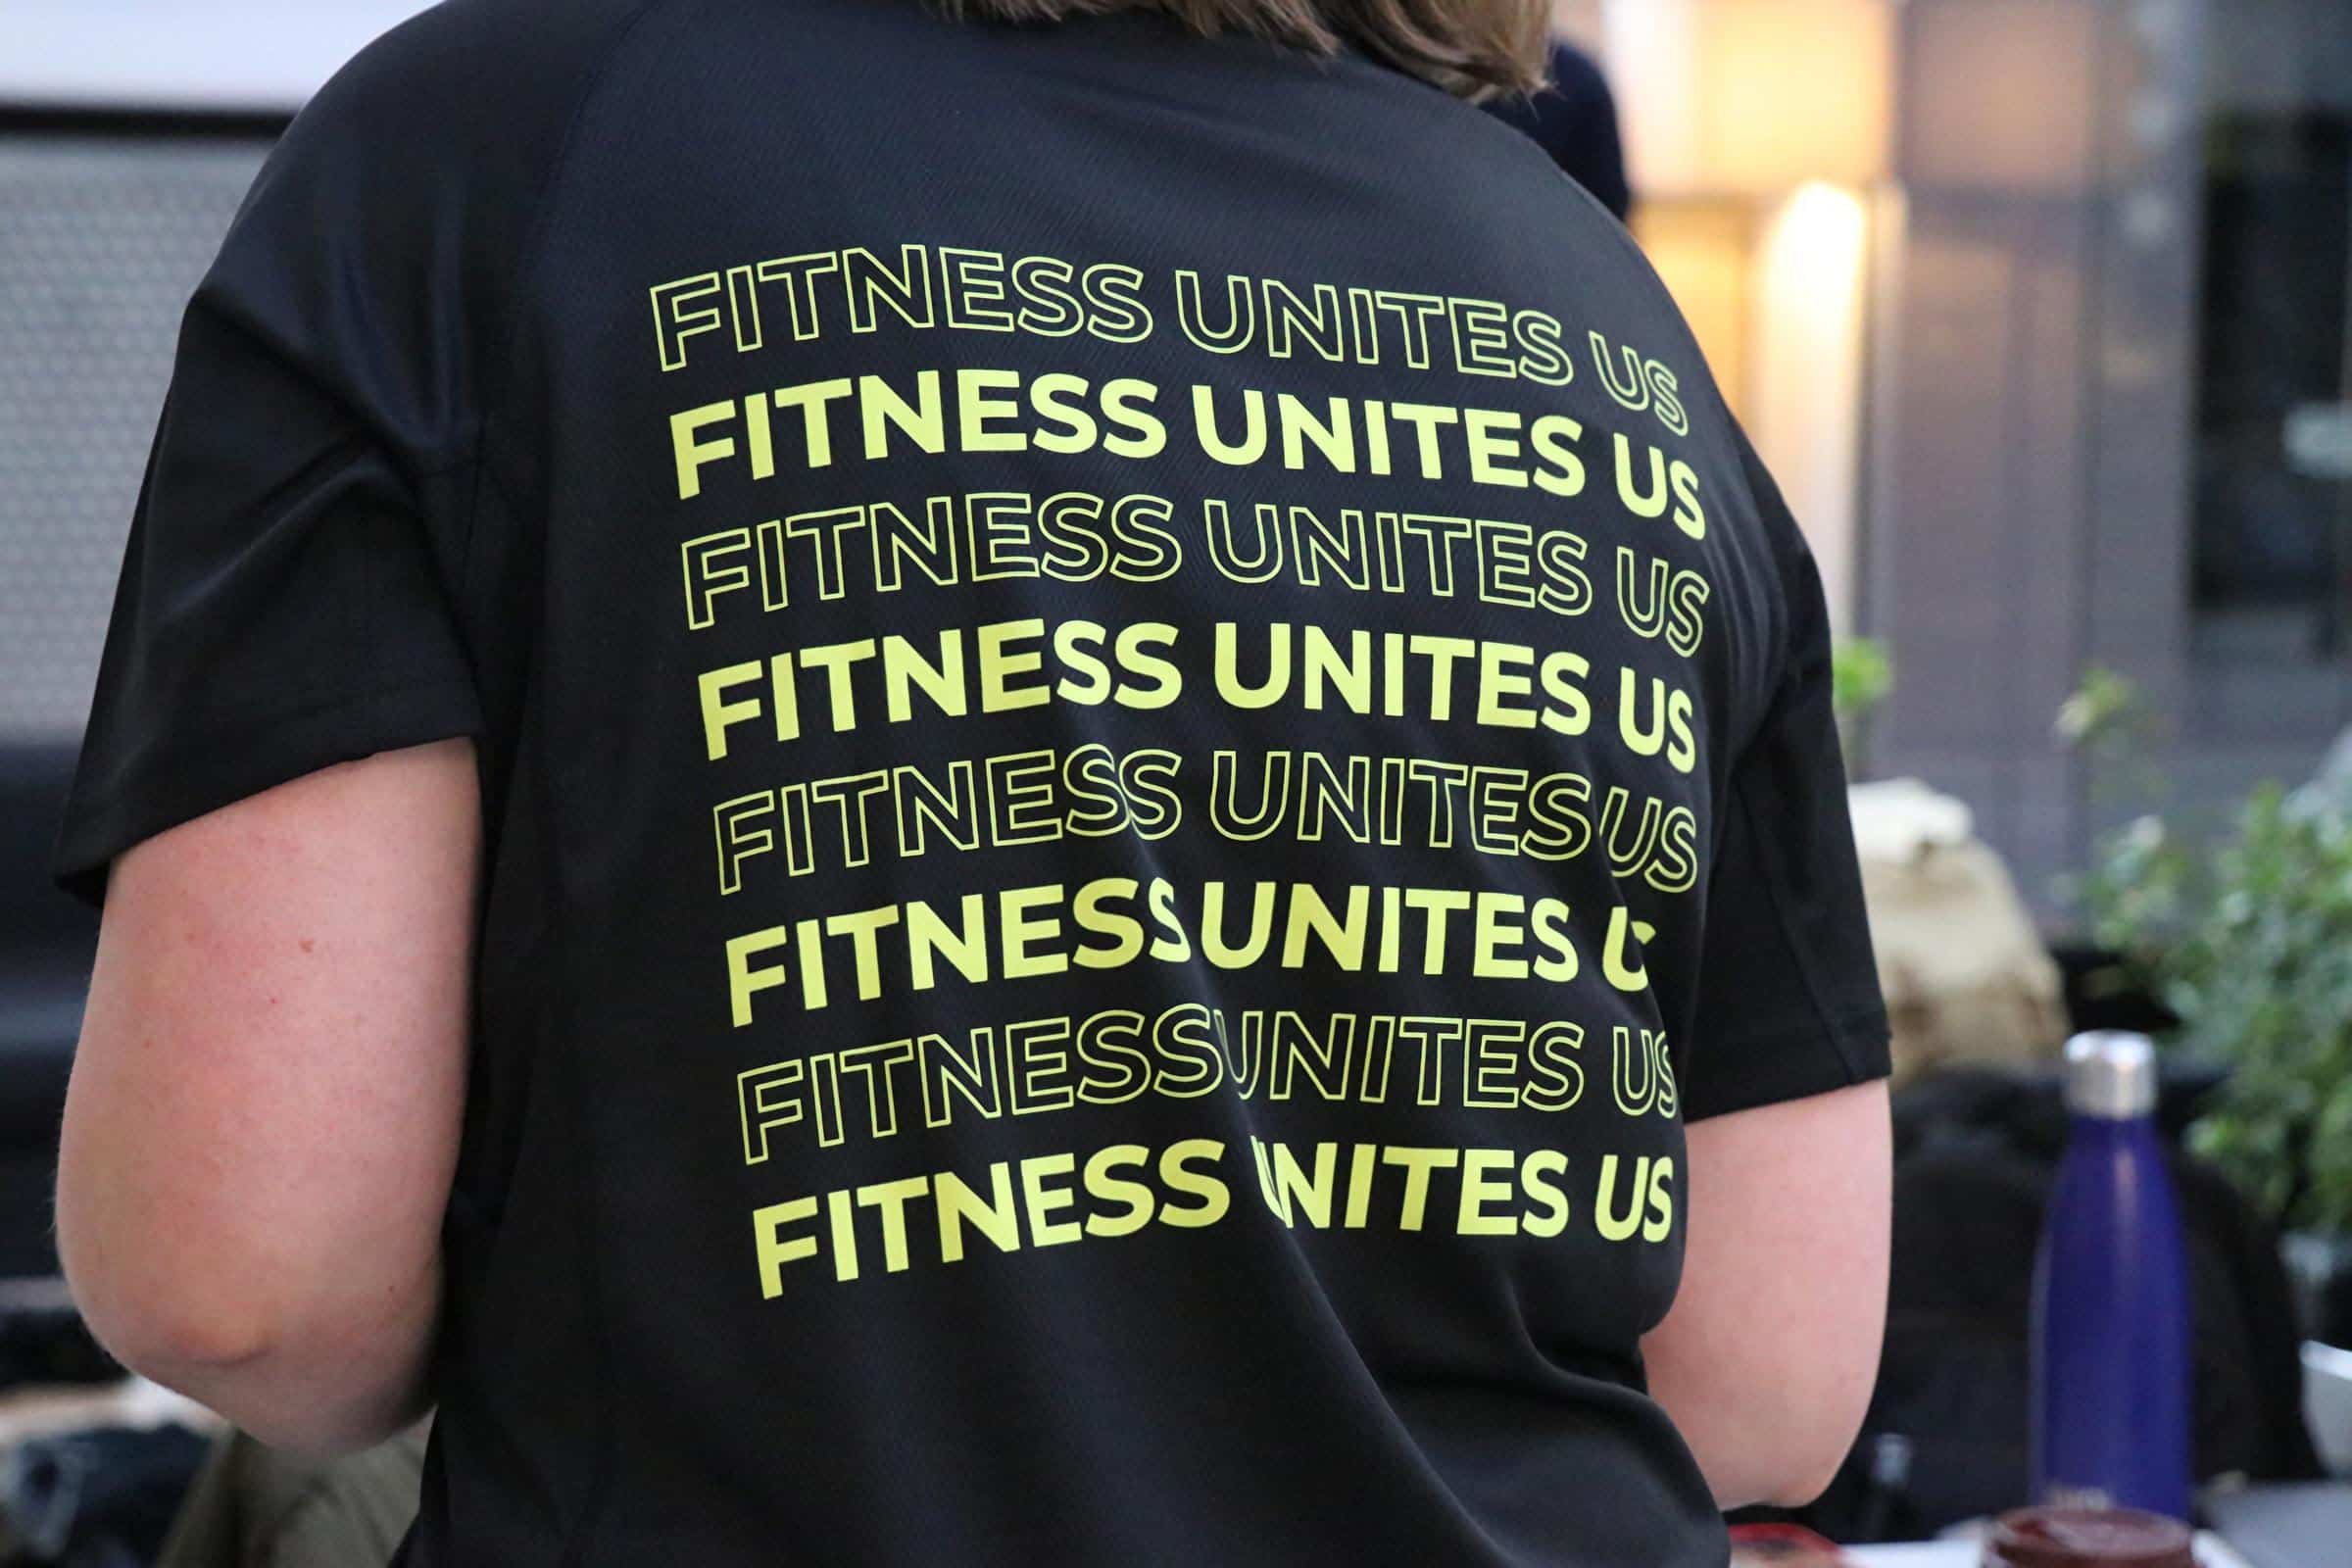 Gym goer wears t-shirt for national fitness day